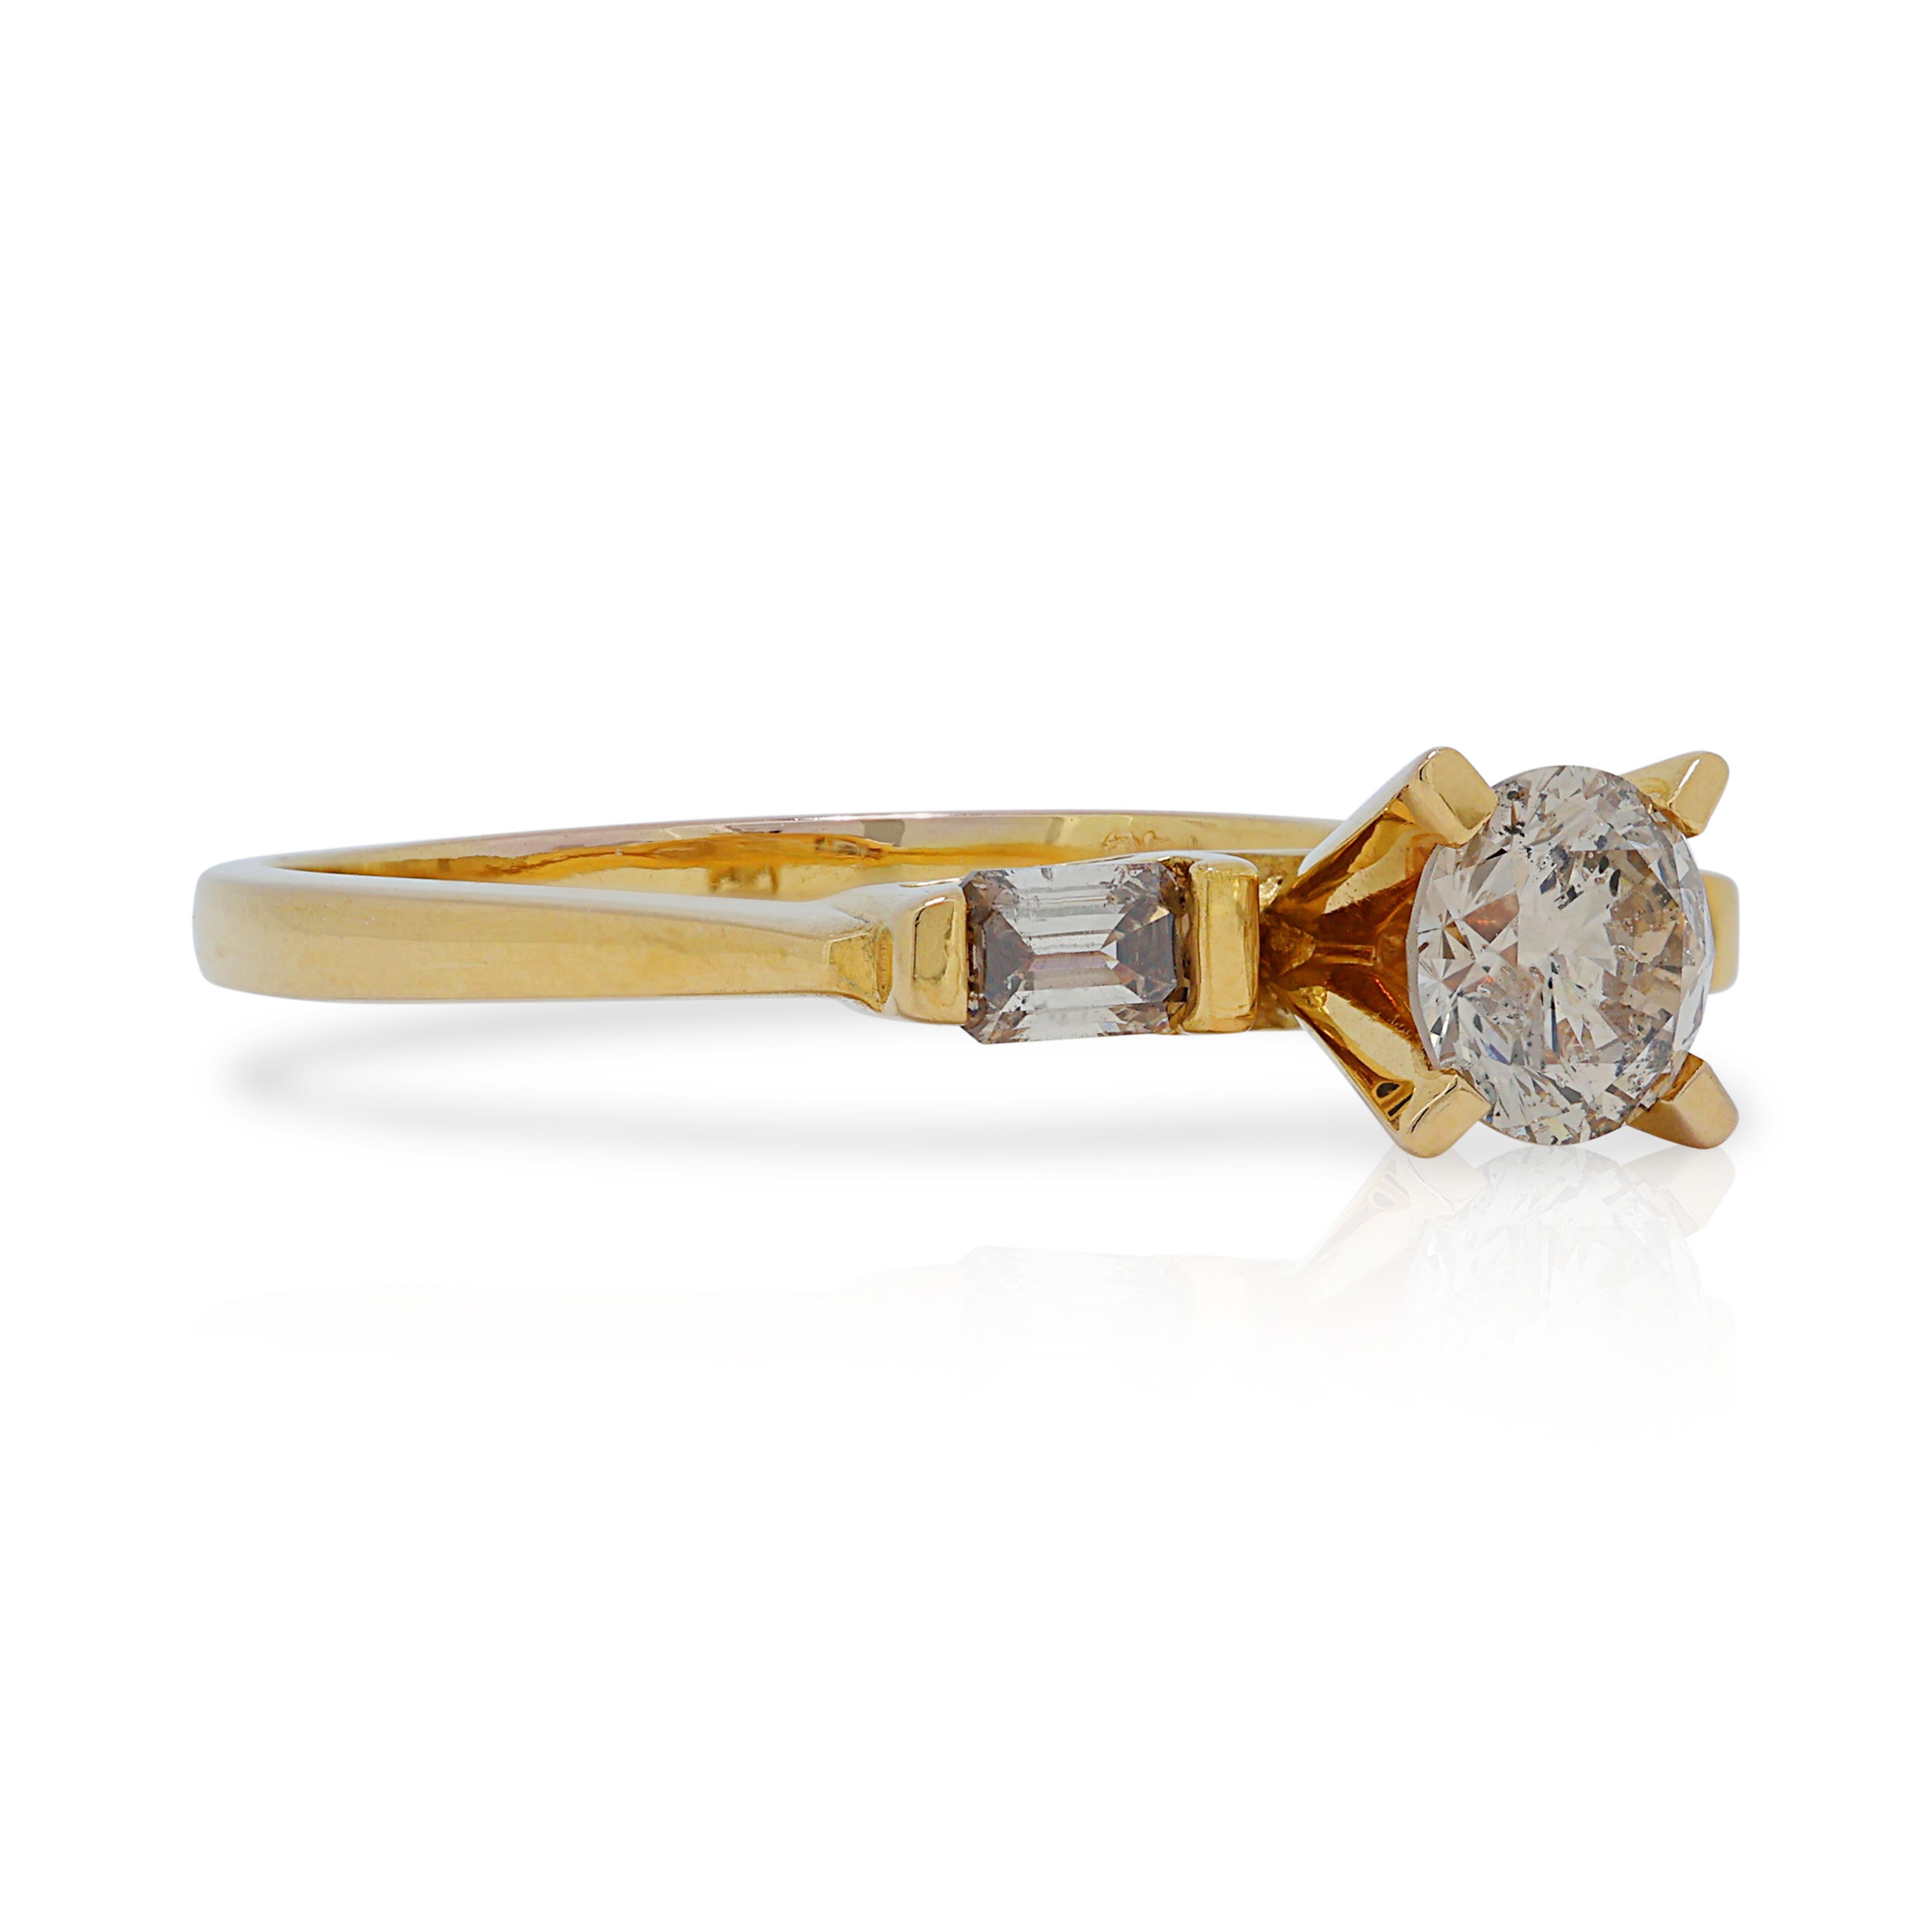 Mesmerizing 0.67ct Diamonds Three Stone Ring in 18K Yellow Gold In Excellent Condition For Sale In רמת גן, IL